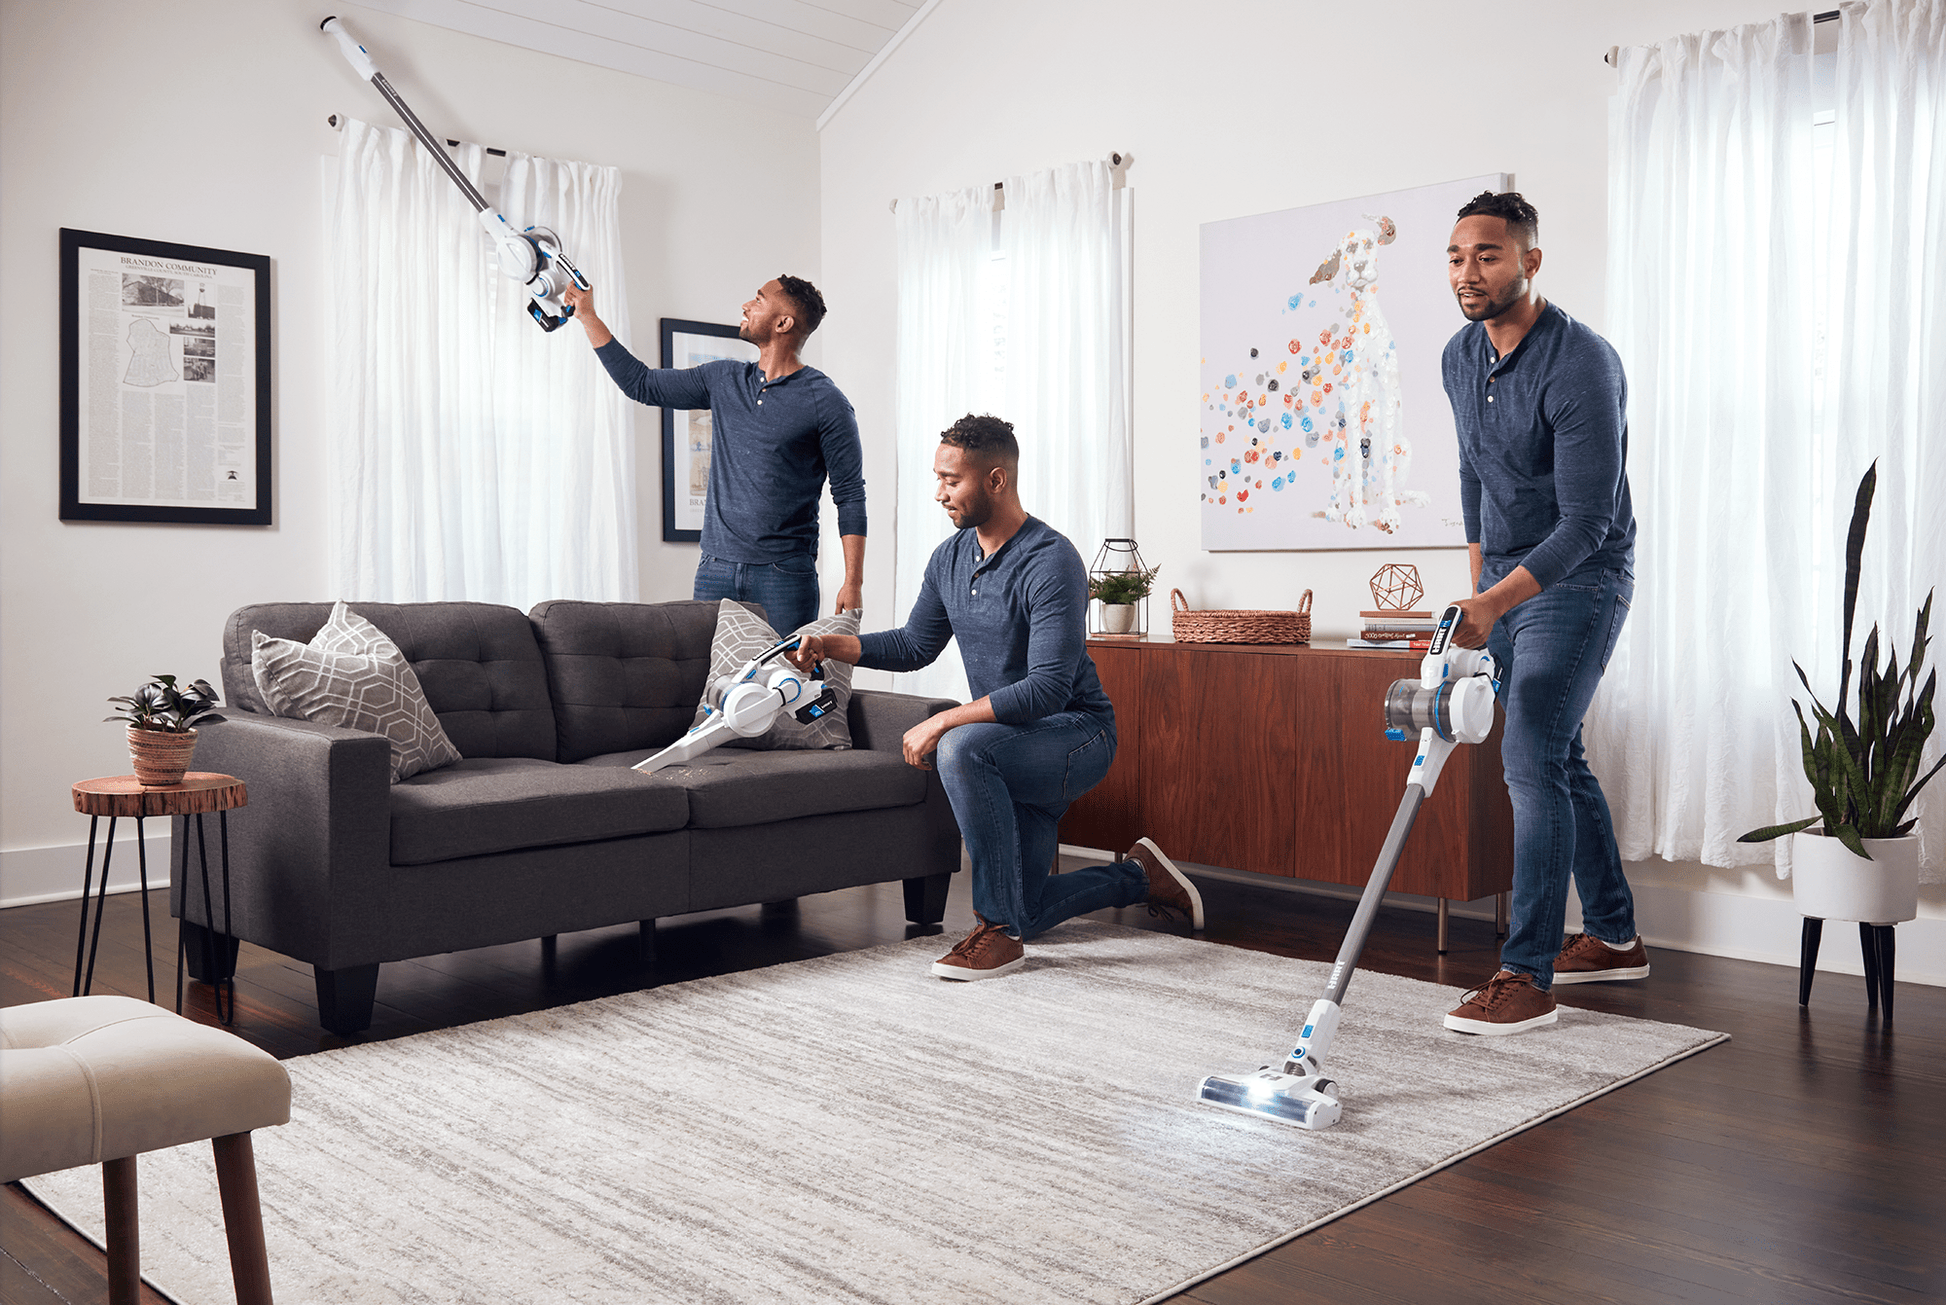 20V Cordless Stick Vacuum (Battery and Charger Not Included)